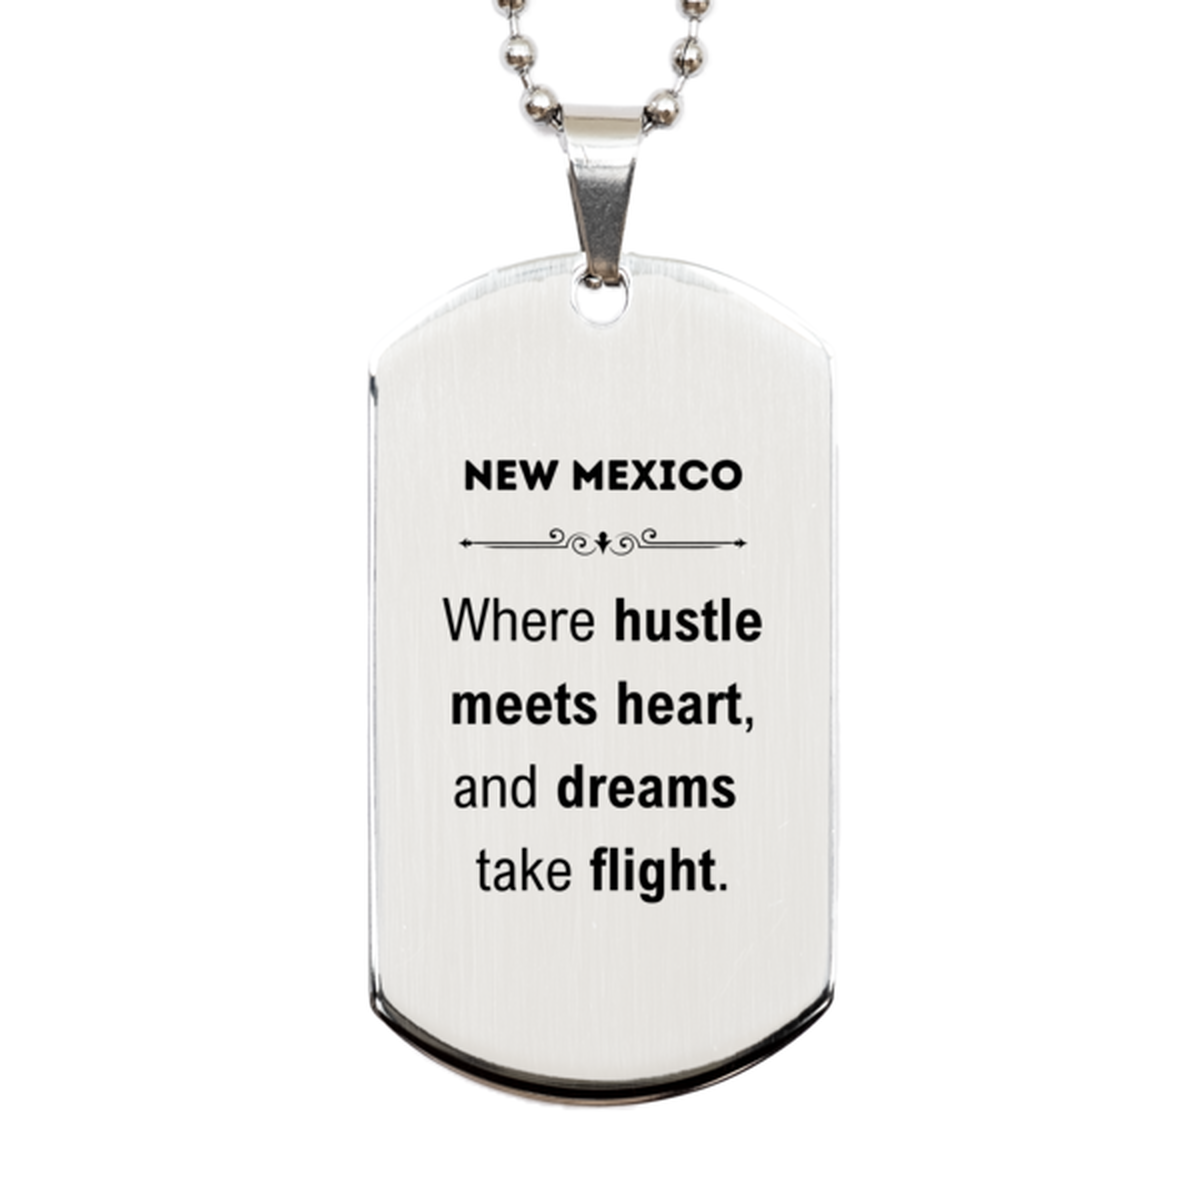 New Mexico: Where hustle meets heart, and dreams take flight, New Mexico Gifts, Proud New Mexico Christmas Birthday New Mexico Silver Dog Tag, New Mexico State People, Men, Women, Friends